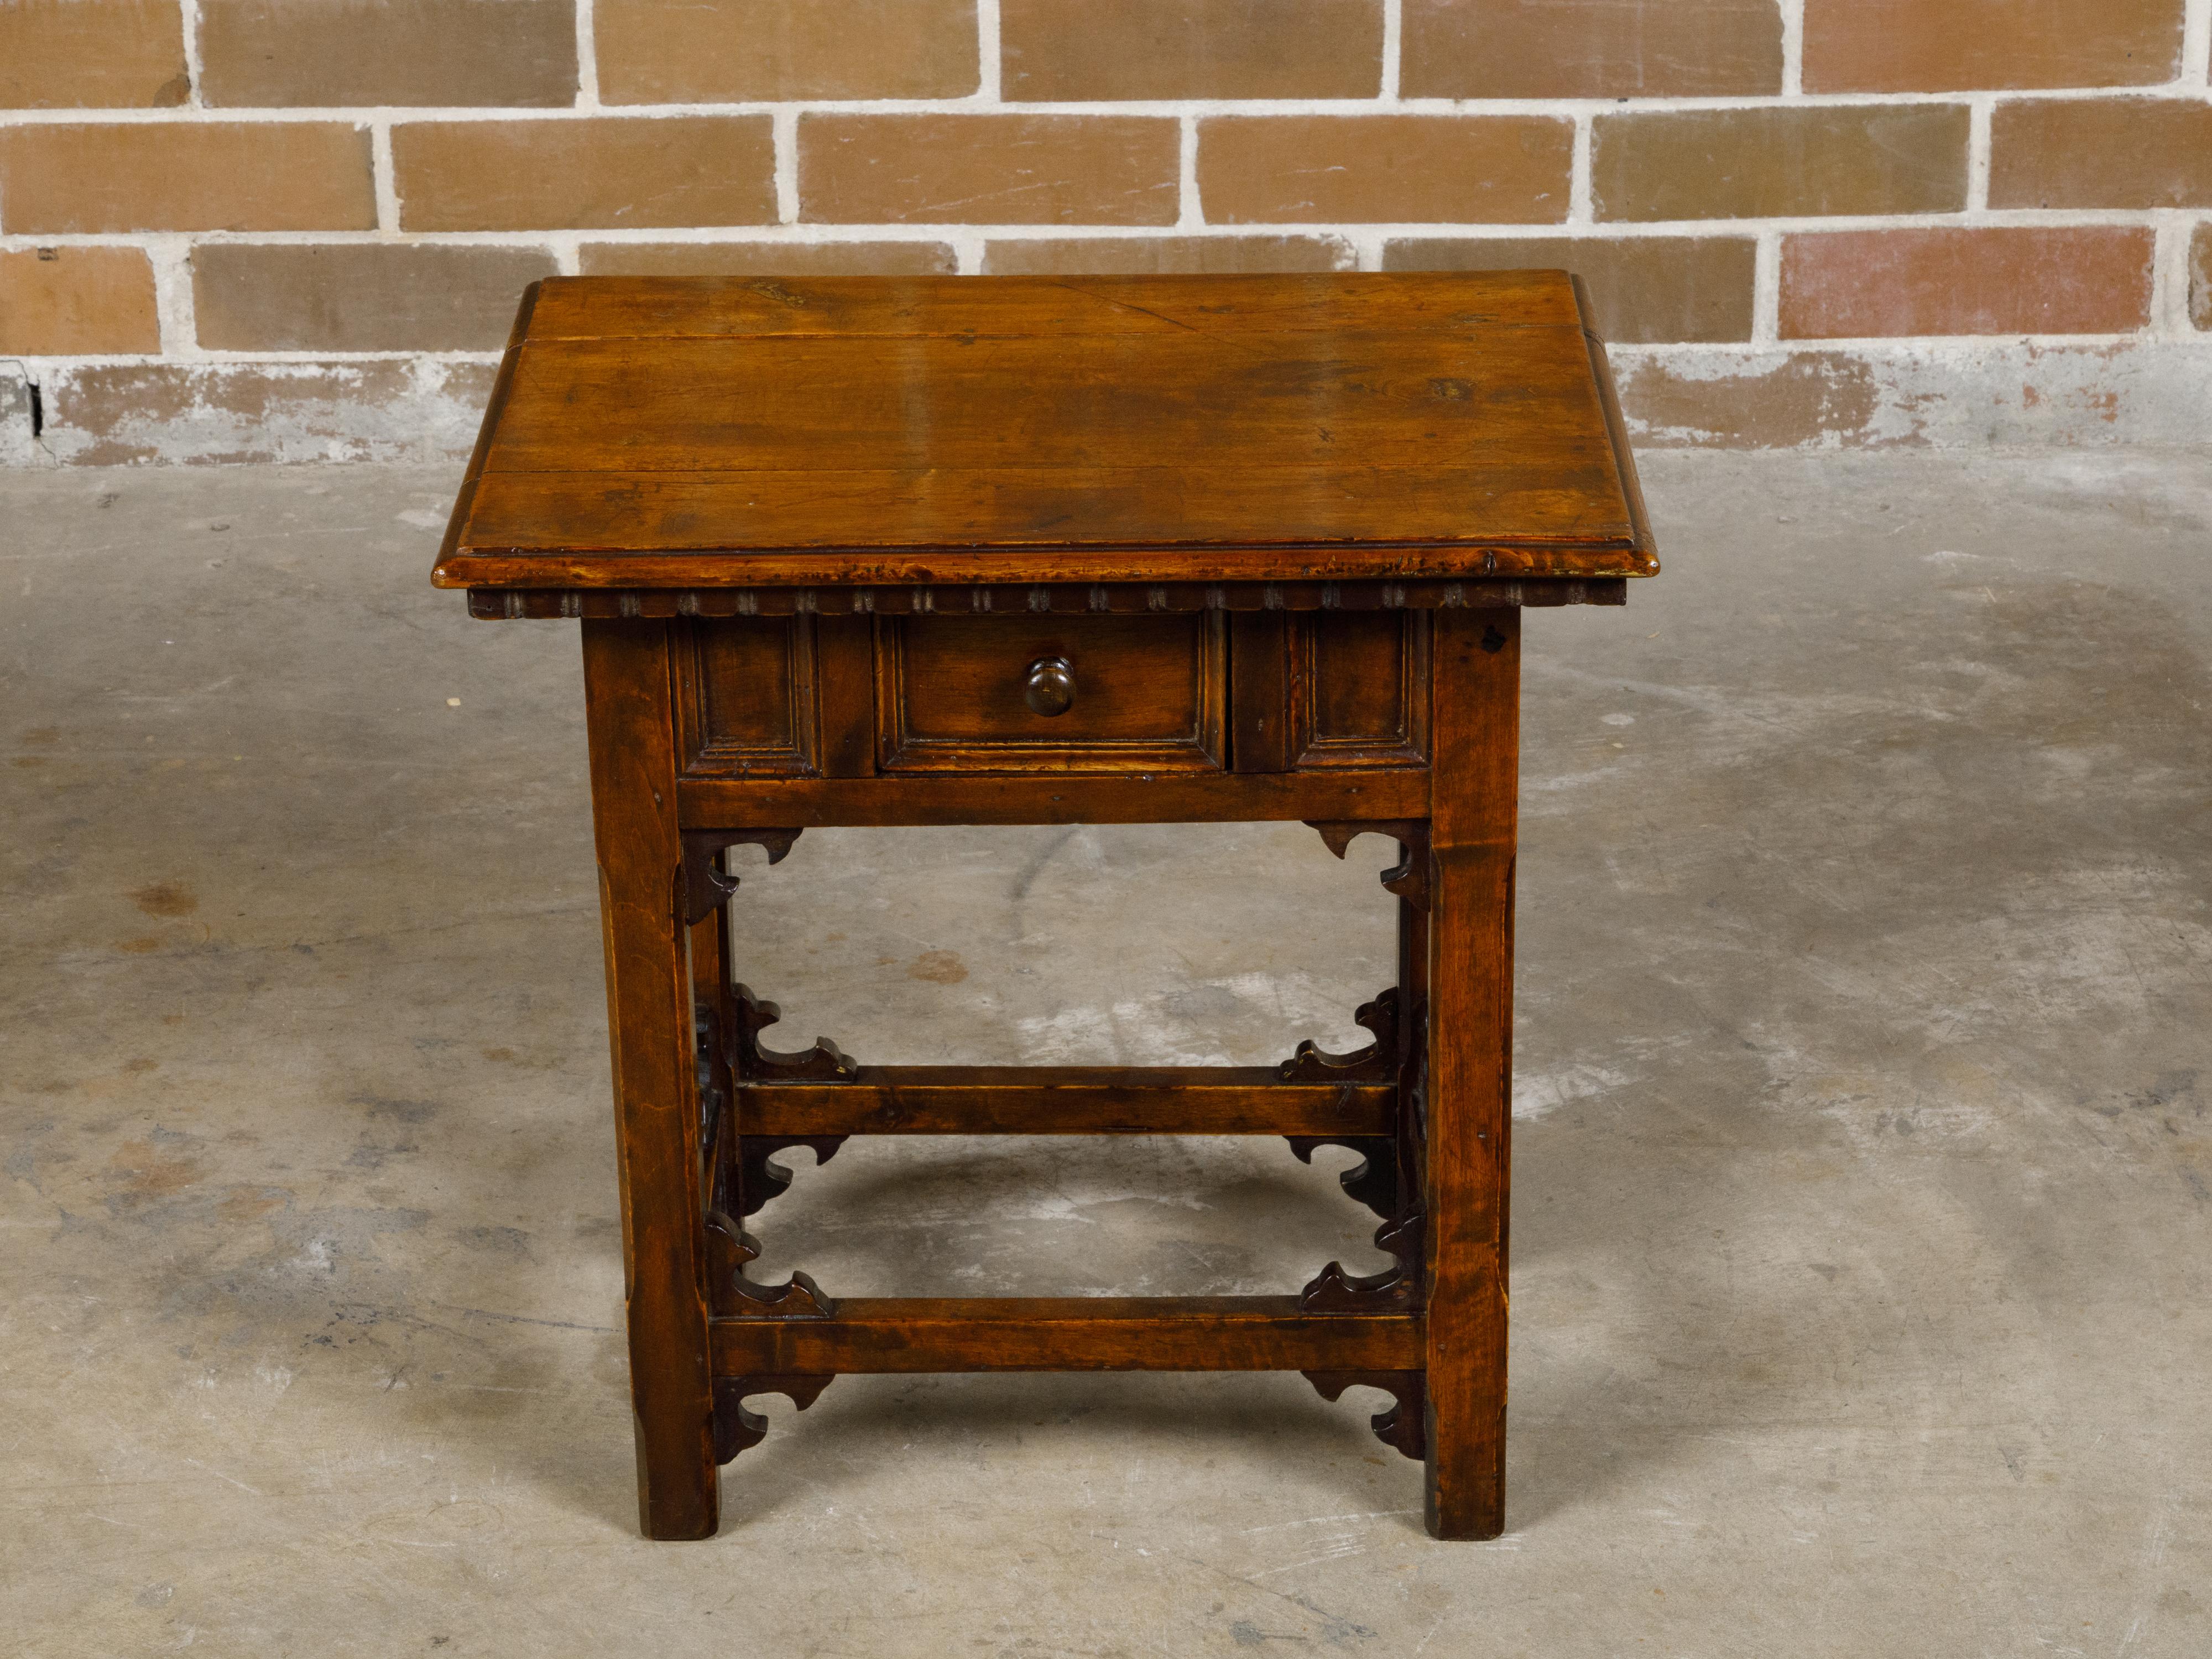 An Italian walnut side table from the 19th century with single drawer and carved spandrels. This Italian walnut side table, hailing from the 19th century, showcases the timeless elegance of traditional craftsmanship. The table features a rectangular